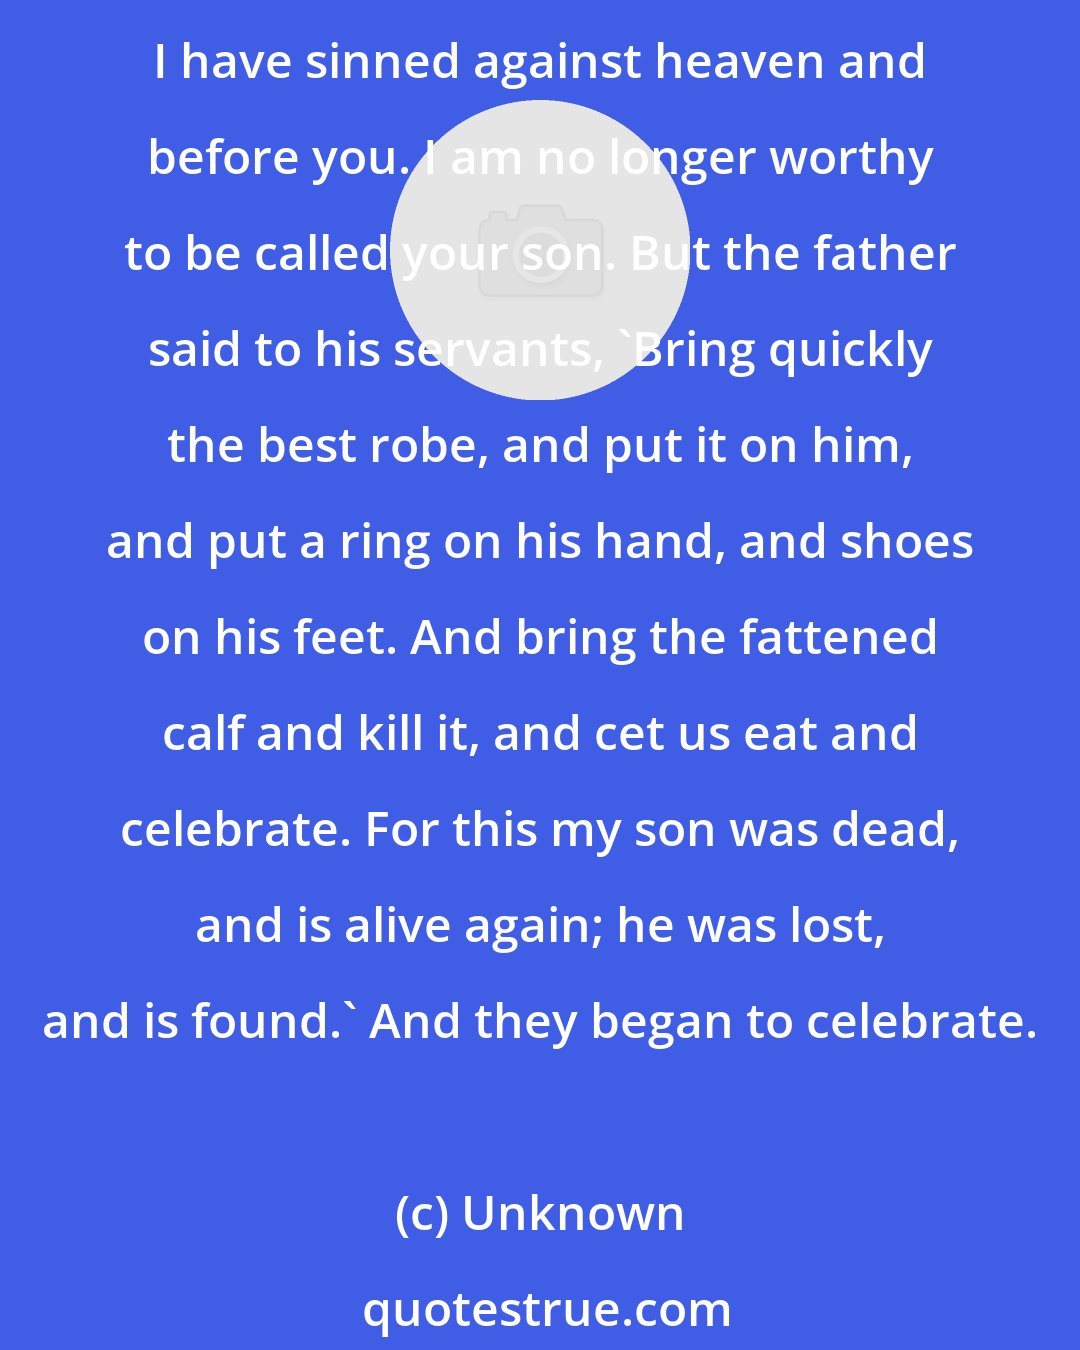 Unknown: And he arose and came to his father. But while he was still a long way off, his father saw him and felt compassion, and ran and embraced him and kissed him. And the son said to him, 'Father, I have sinned against heaven and before you. I am no longer worthy to be called your son. But the father said to his servants, 'Bring quickly the best robe, and put it on him, and put a ring on his hand, and shoes on his feet. And bring the fattened calf and kill it, and cet us eat and celebrate. For this my son was dead, and is alive again; he was lost, and is found.' And they began to celebrate.